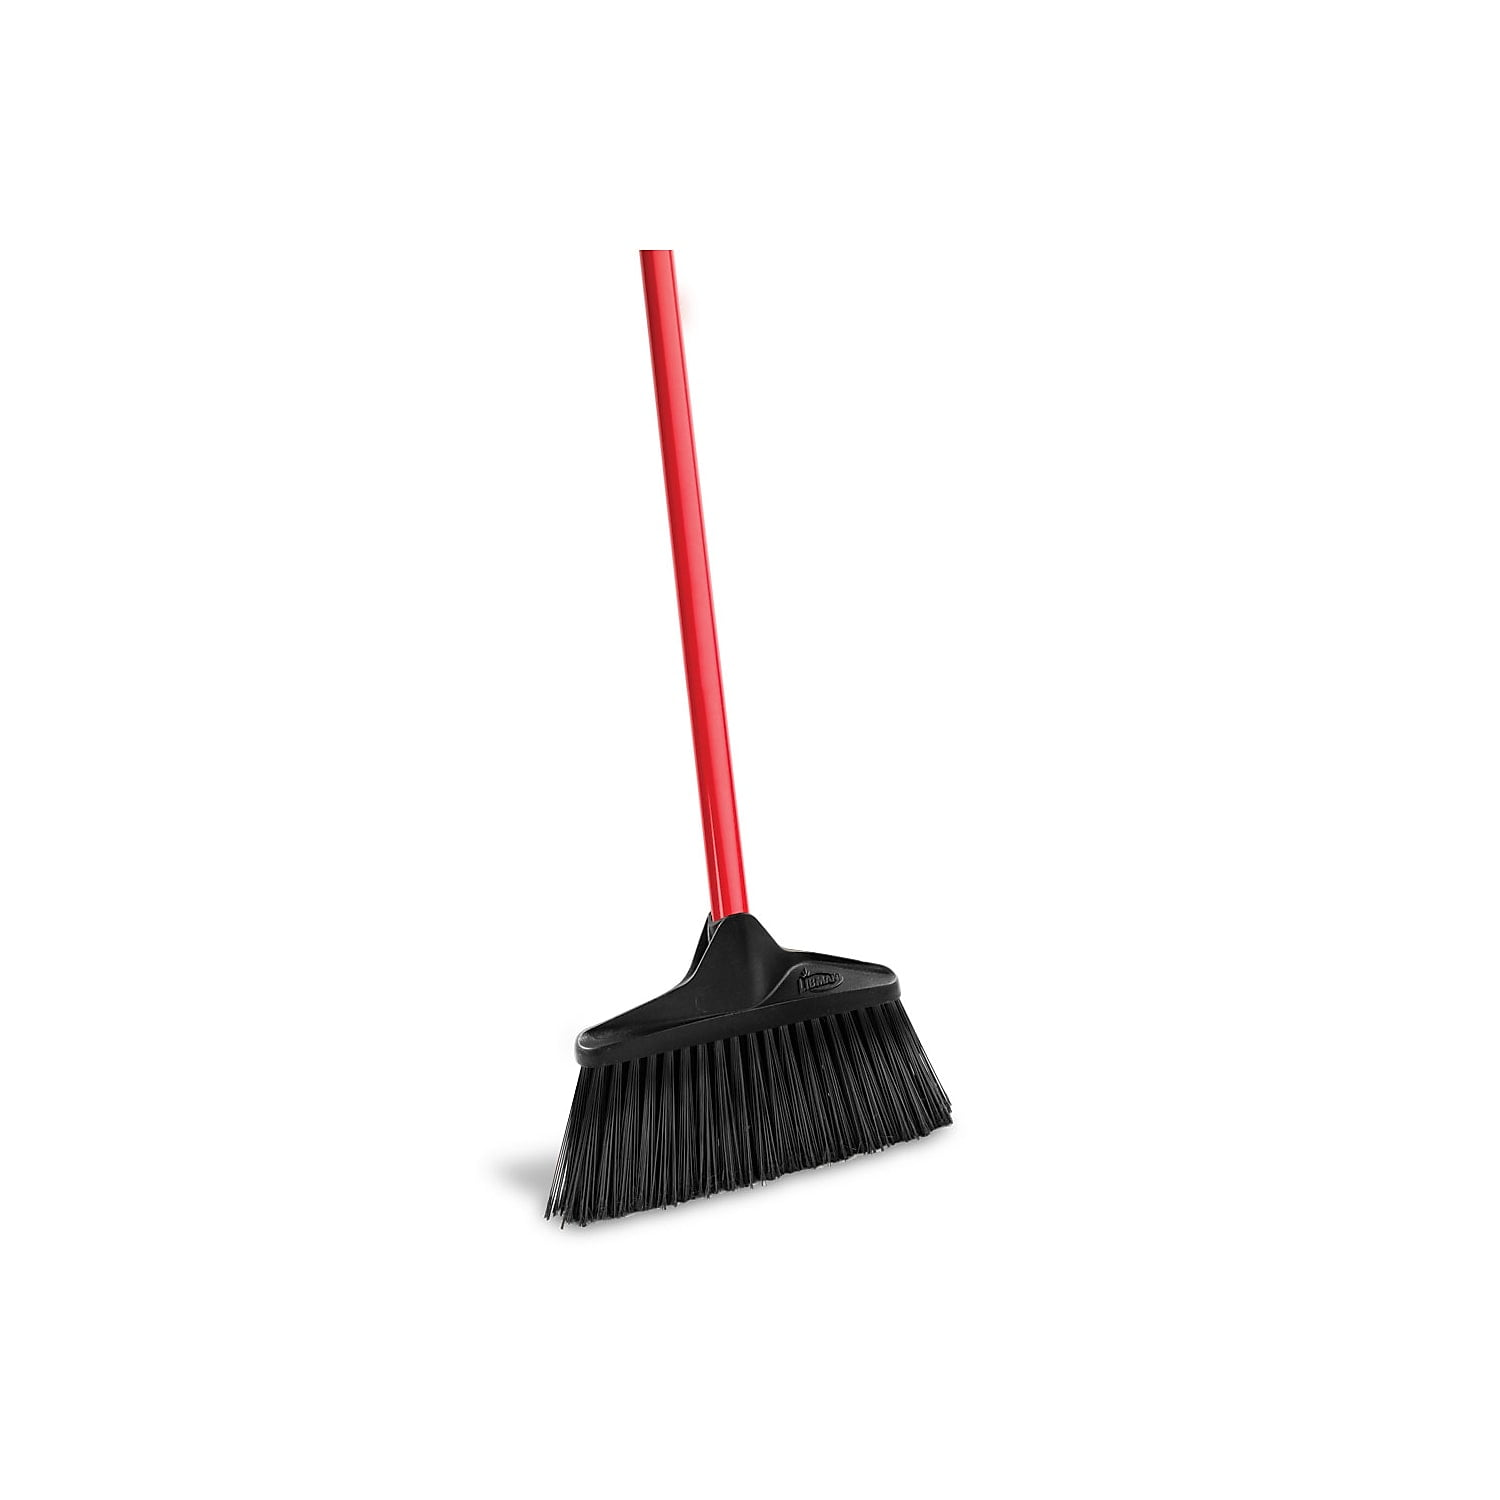 Libman Commercial Precision Angle Broom with Dustpan 53" Handle Green/Gray 4 